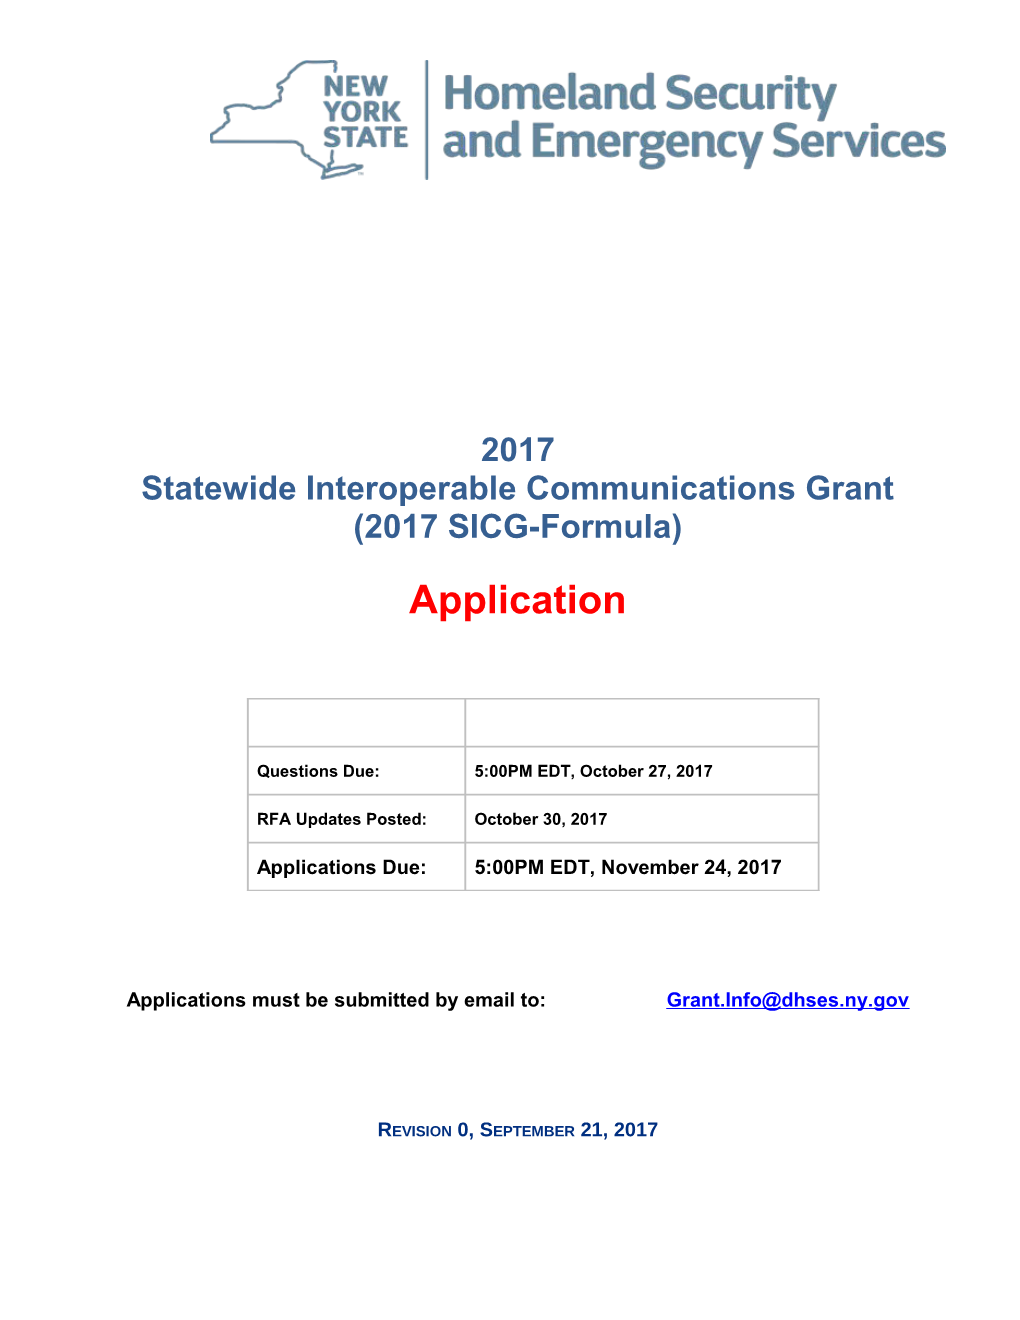 Statewide Interoperable Communications Grant